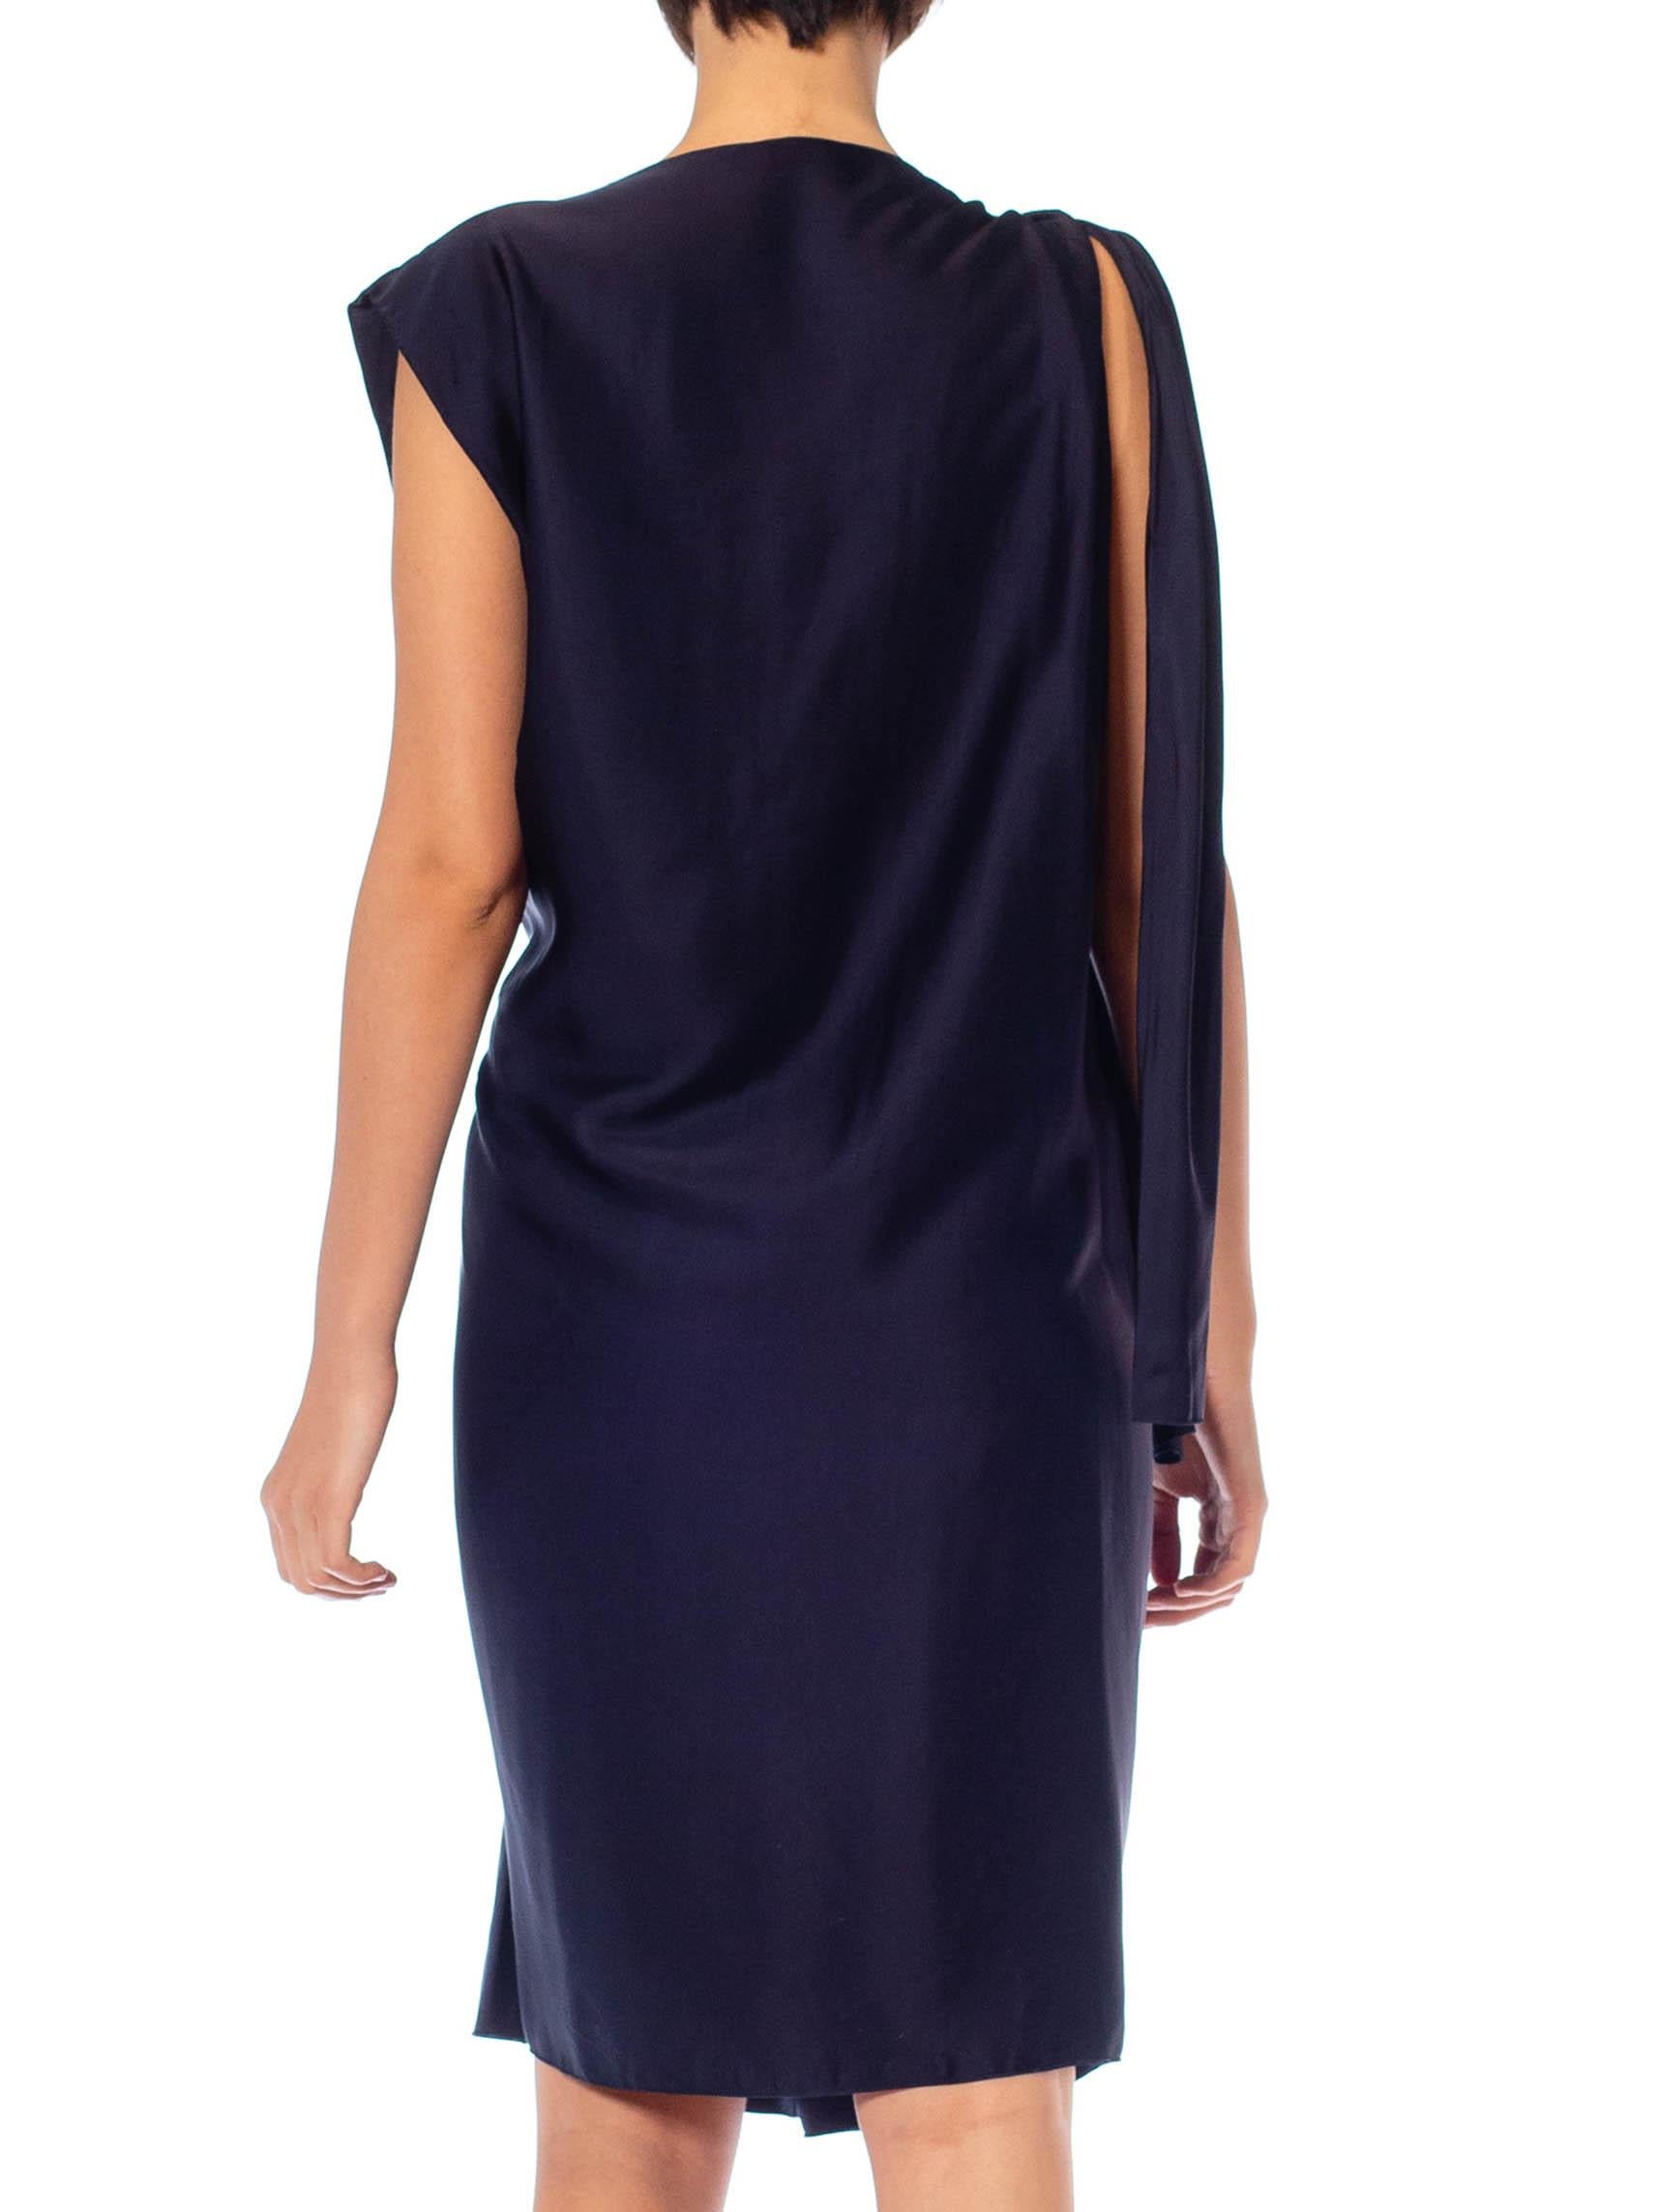 2000S Lanvin Navy Blue Silk Satin Deconstructed Wrap Dress In Excellent Condition For Sale In New York, NY